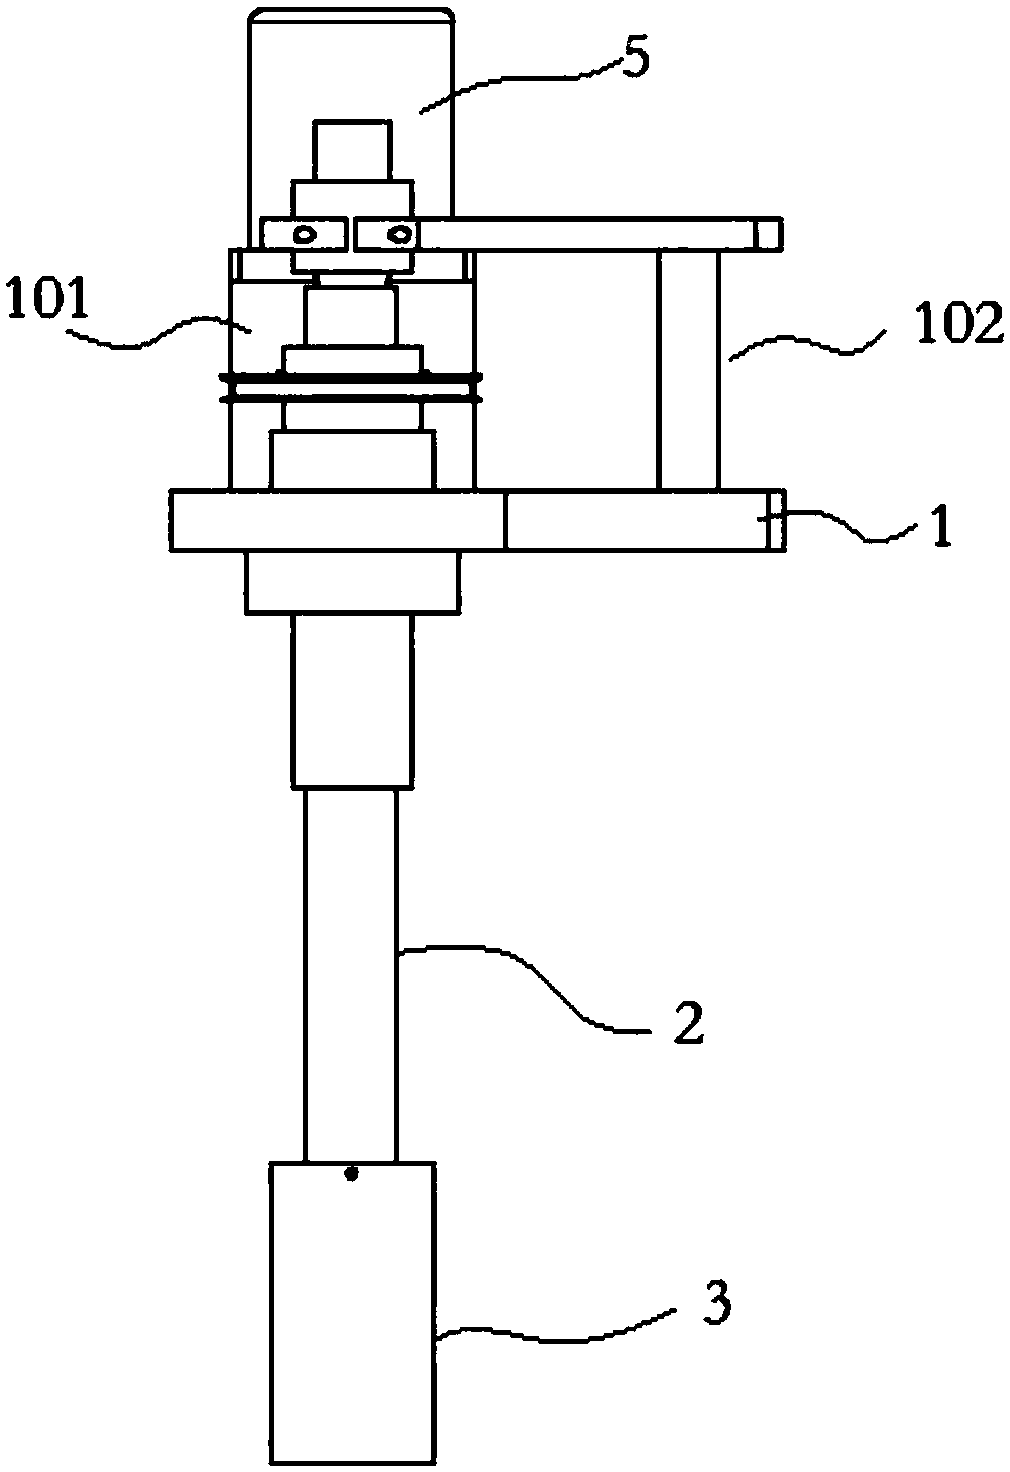 Flame polishing device for inner part of glassware